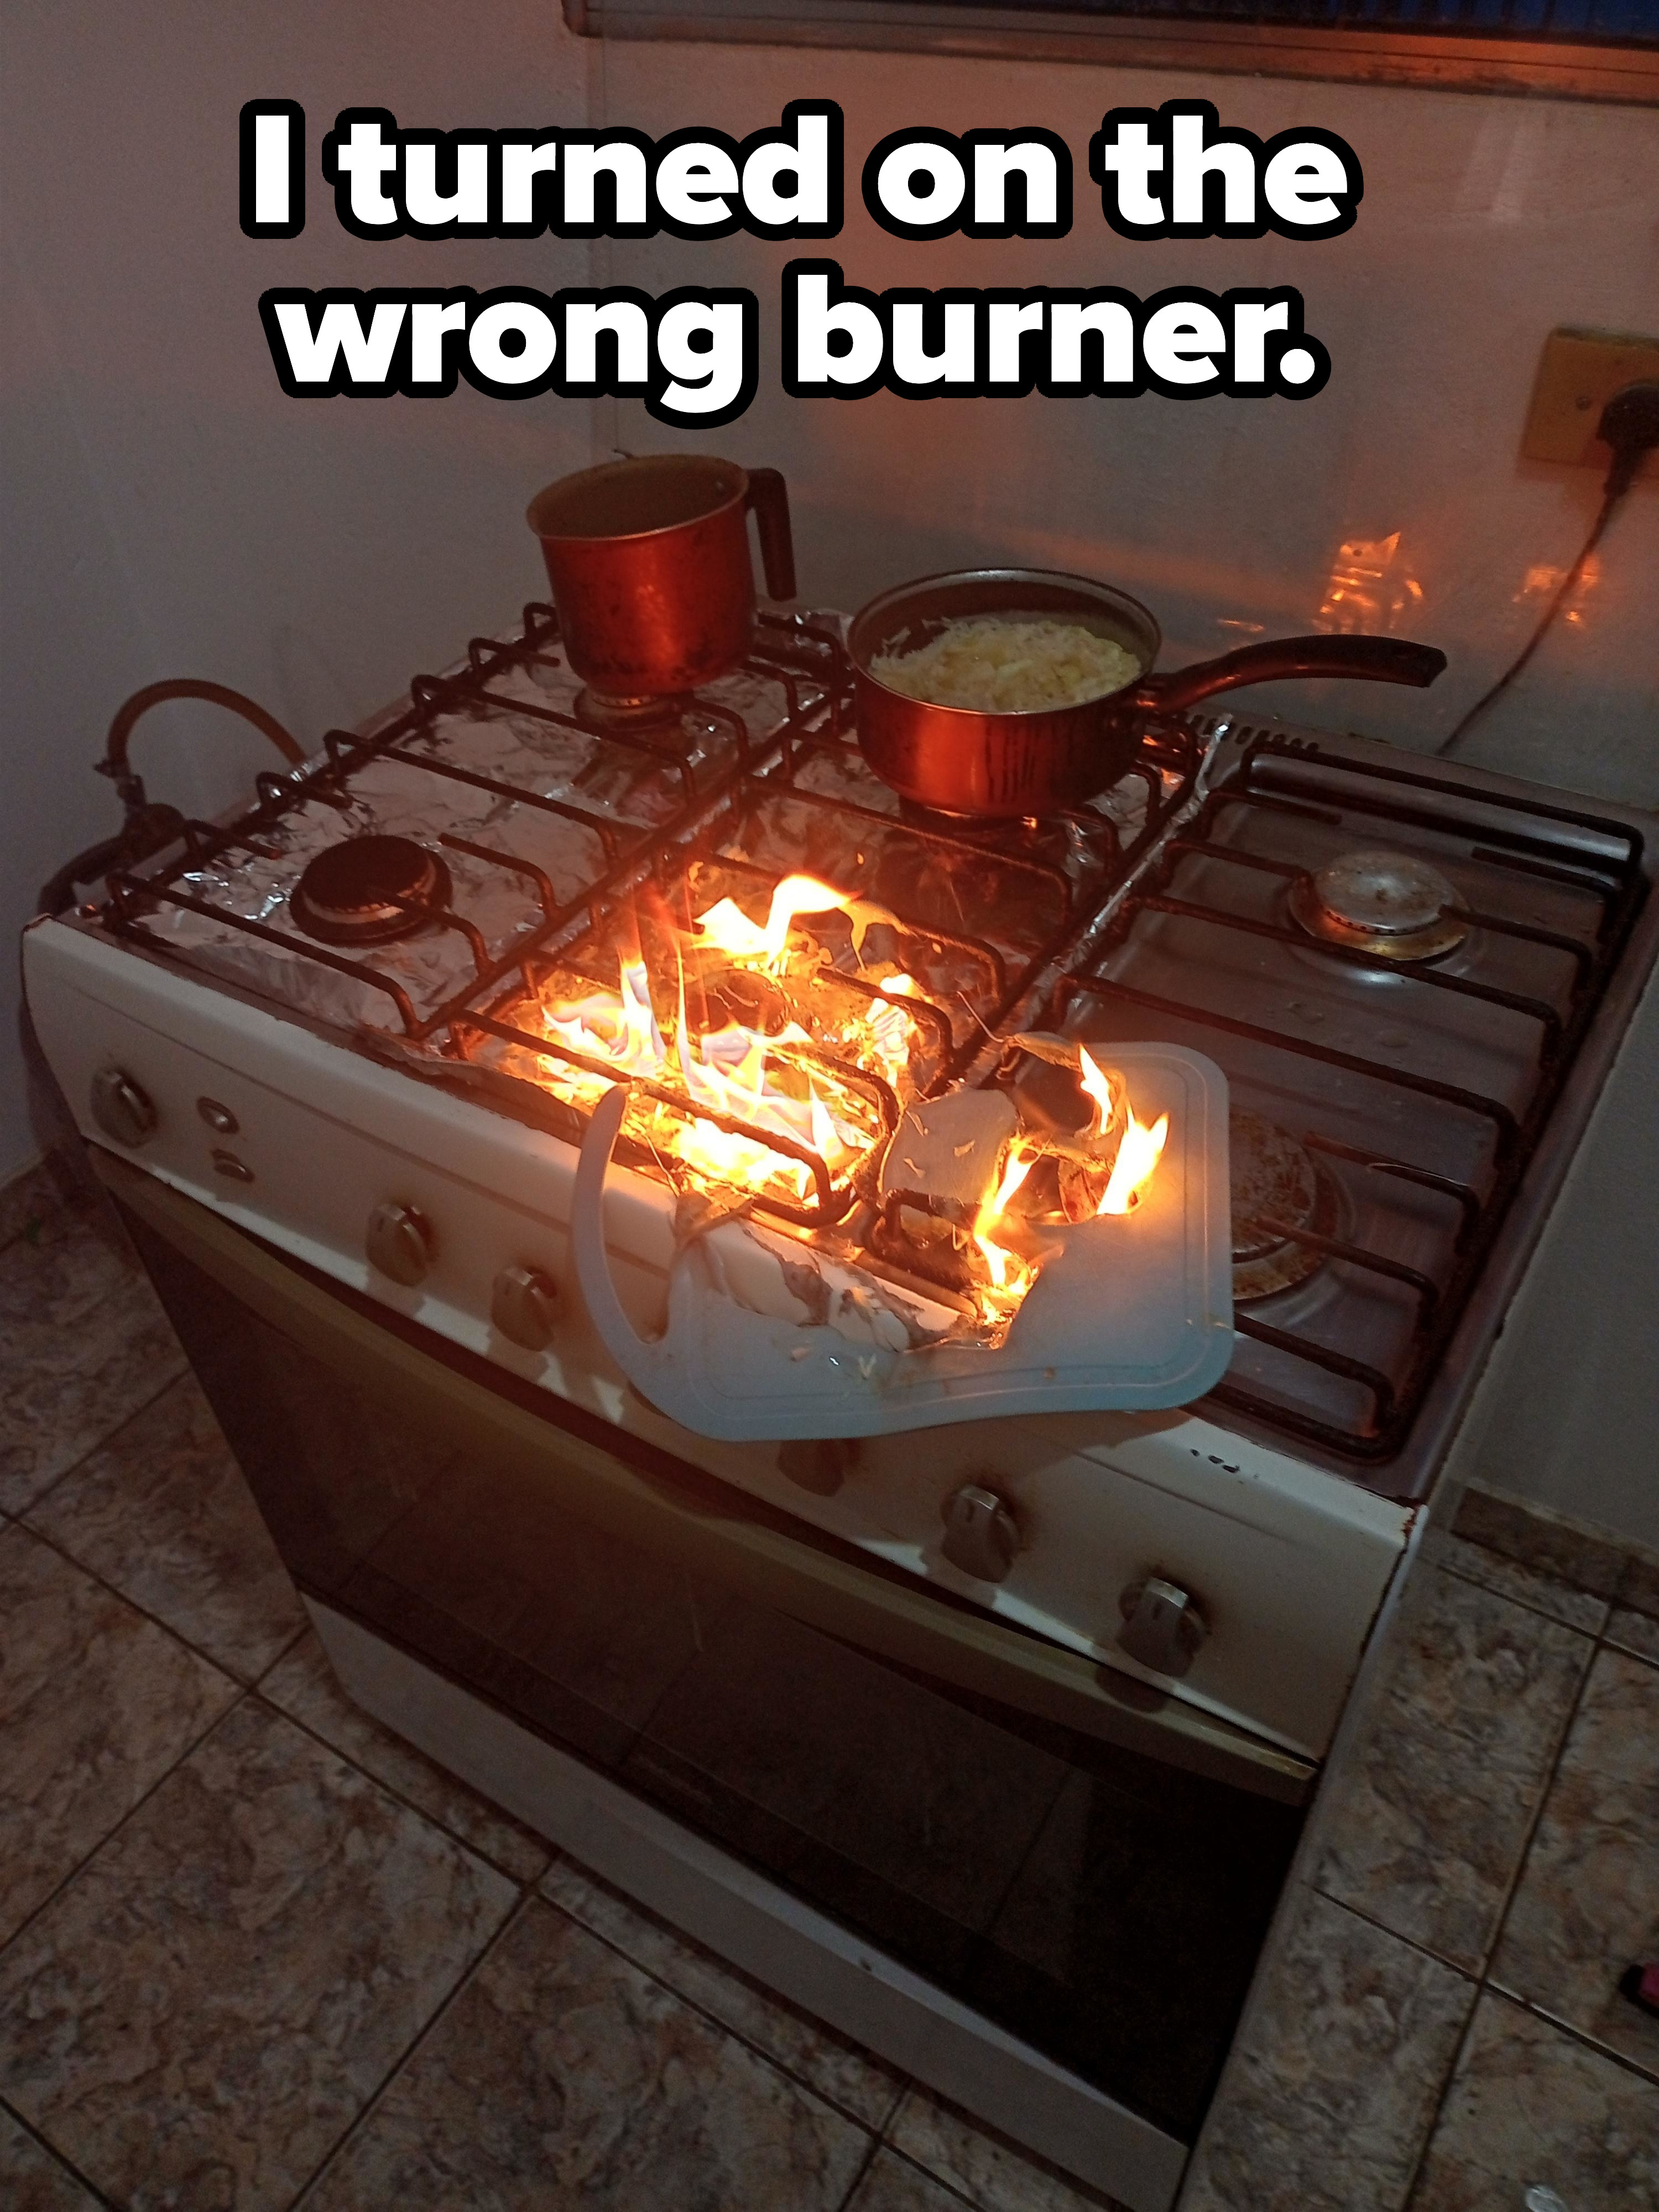 person who turned on the wrong burner and burner a cutting board